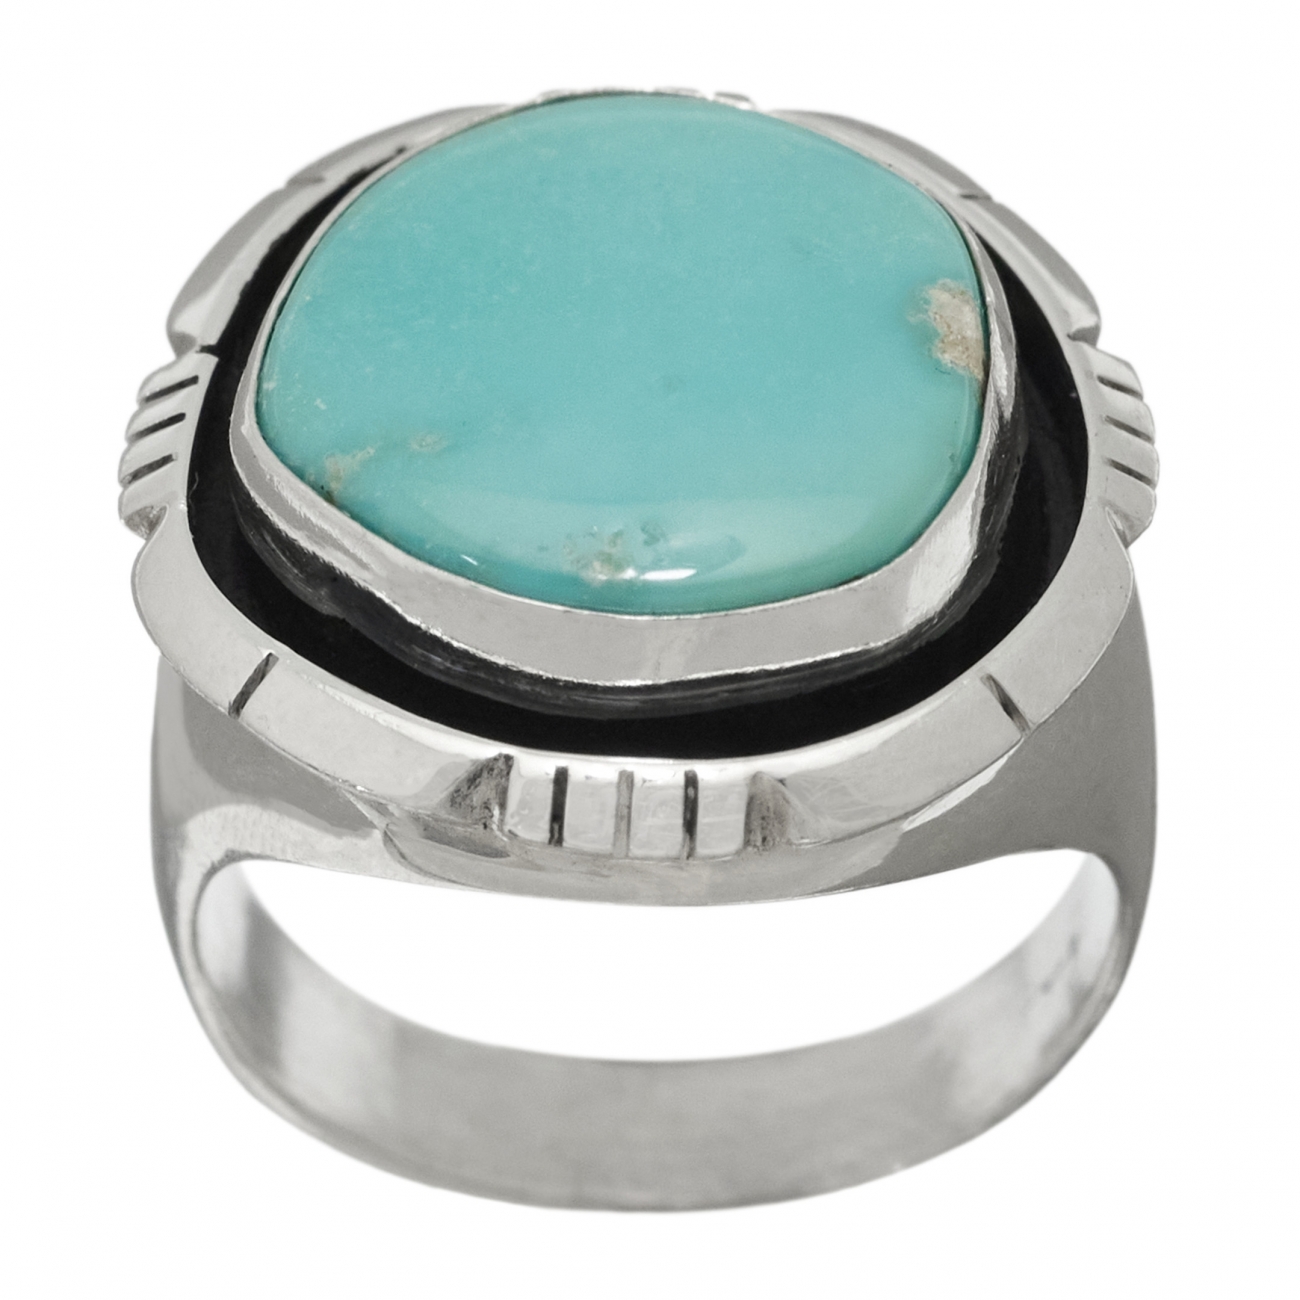 Navajo ring for women BA1047 in turquoise and silver - Harpo Paris